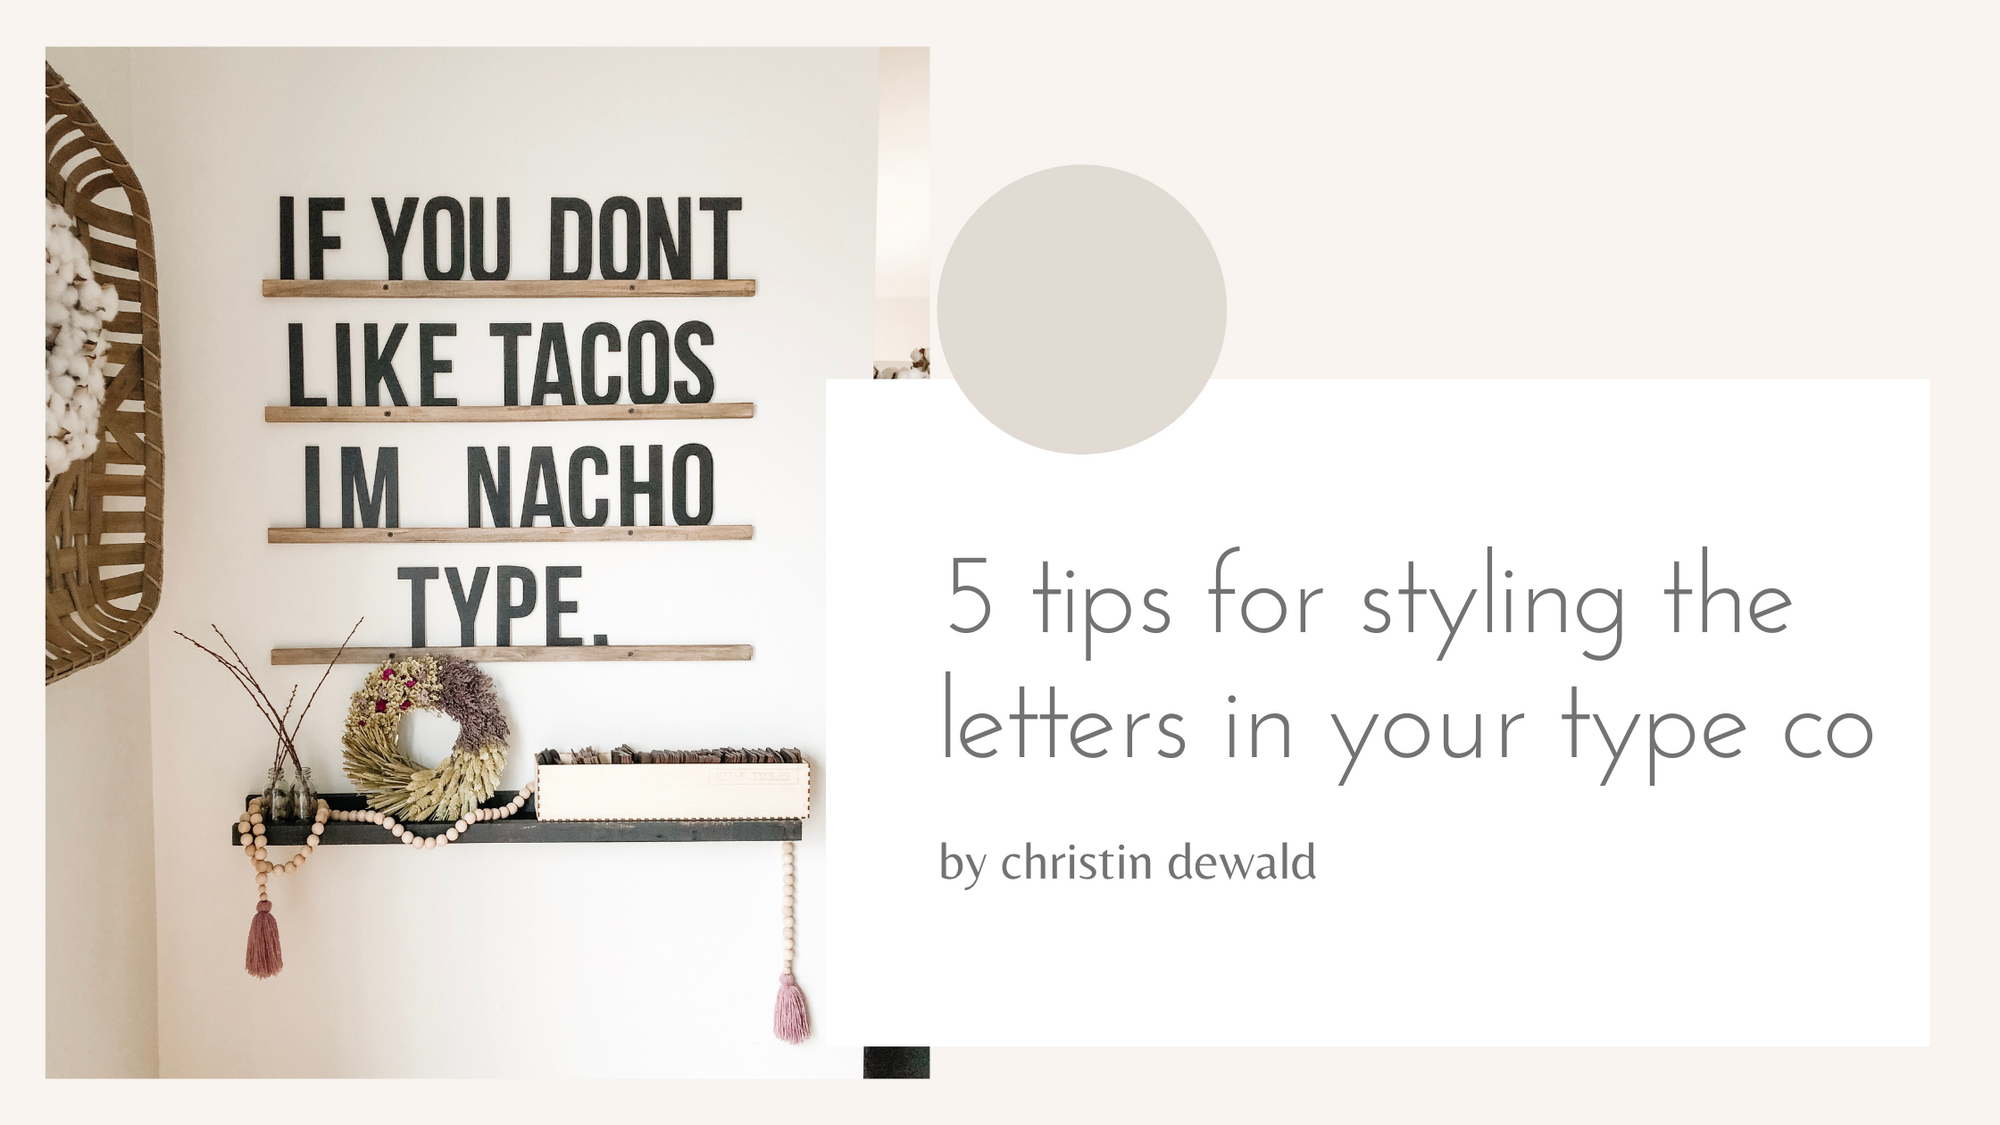 5 tips for styling the letters in your Type Co